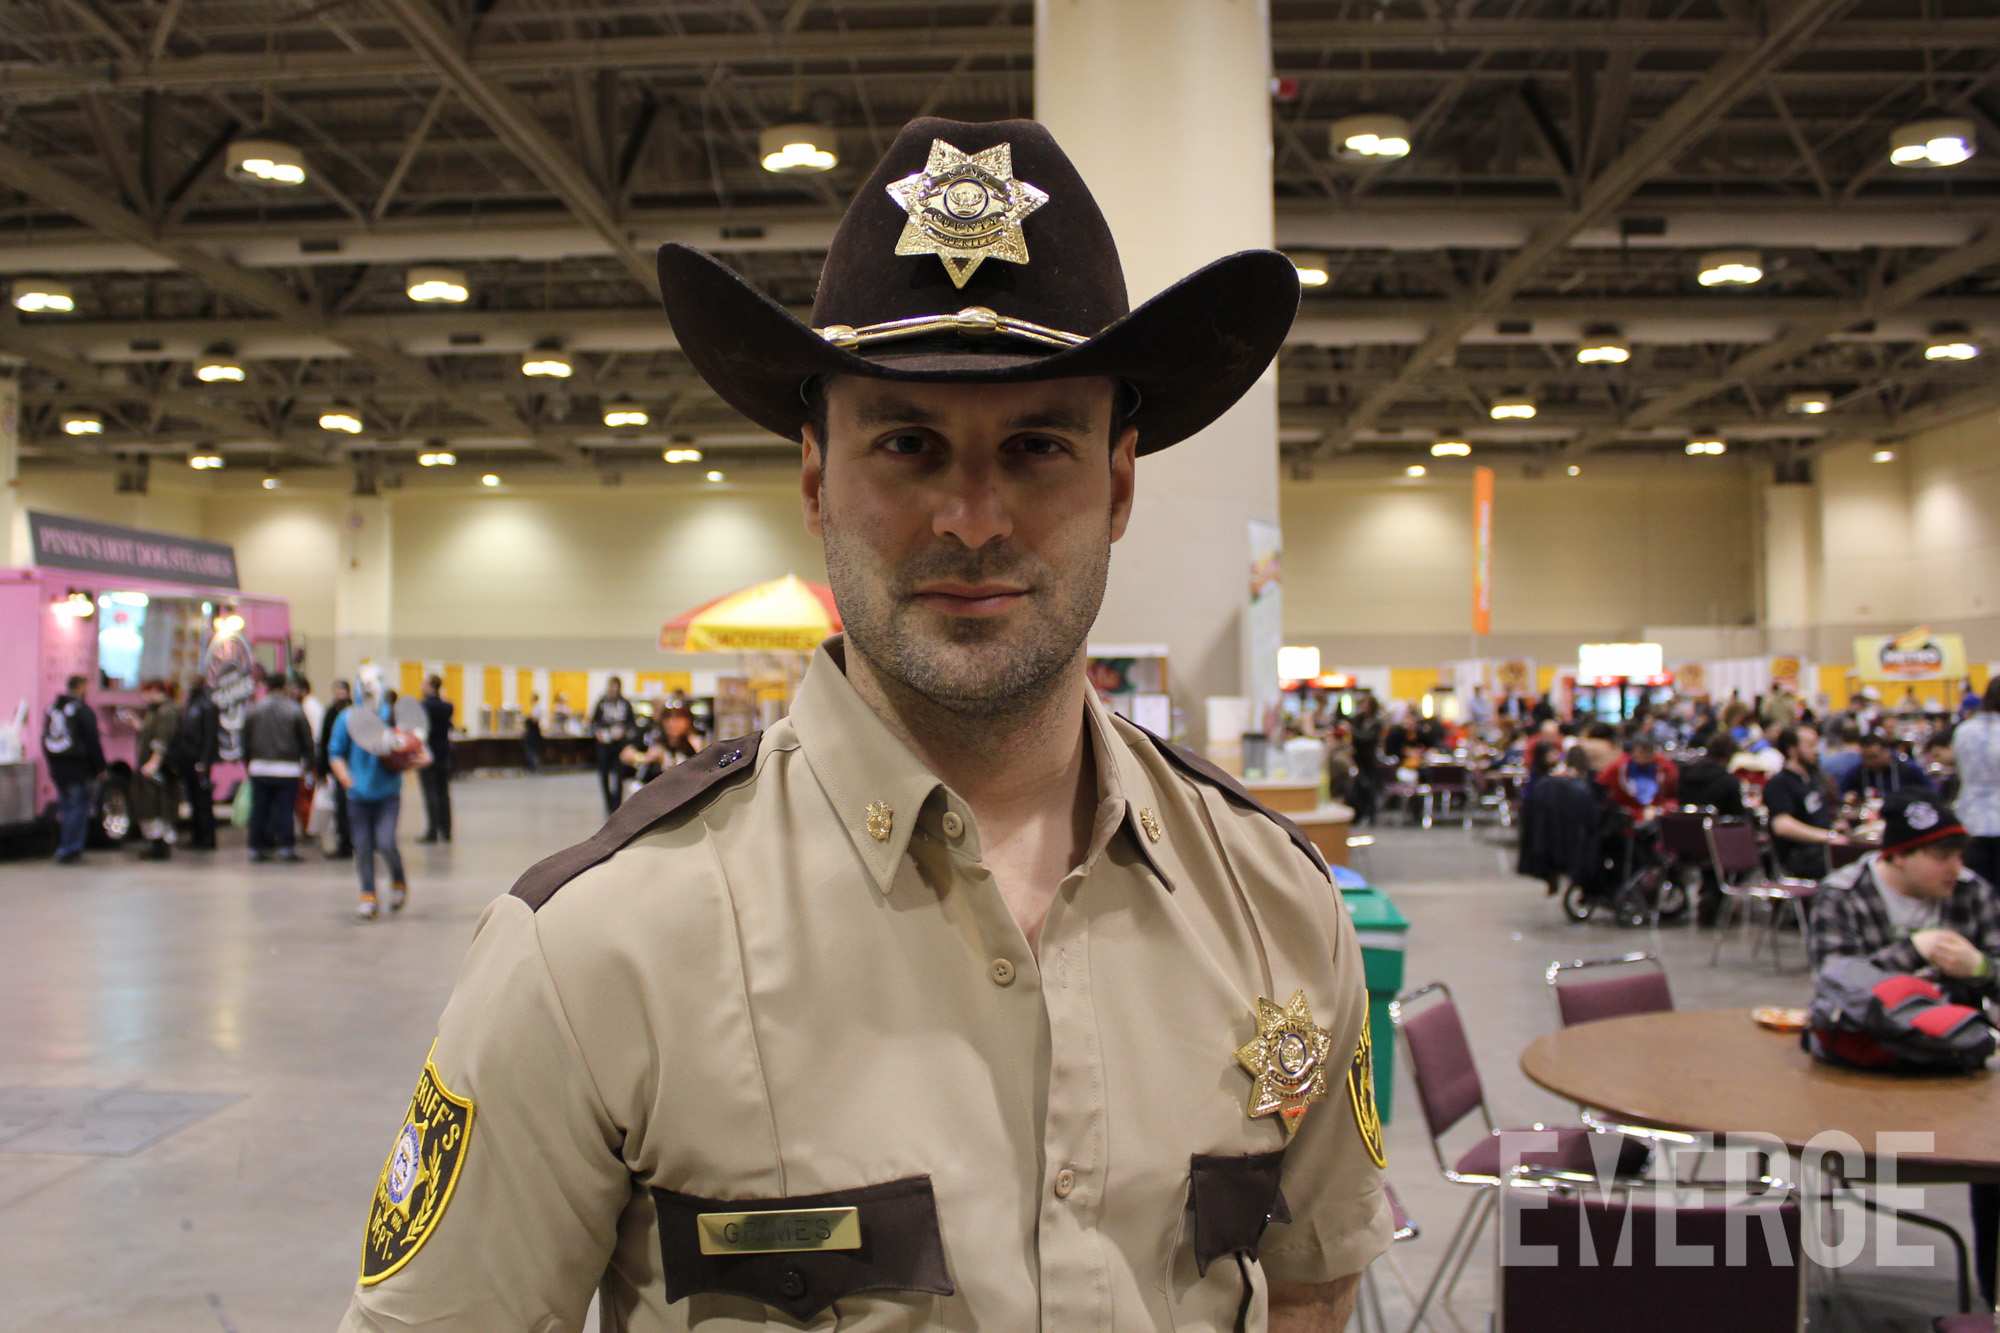 Rick Grimes from The Walking Dead, before all the blood and guts